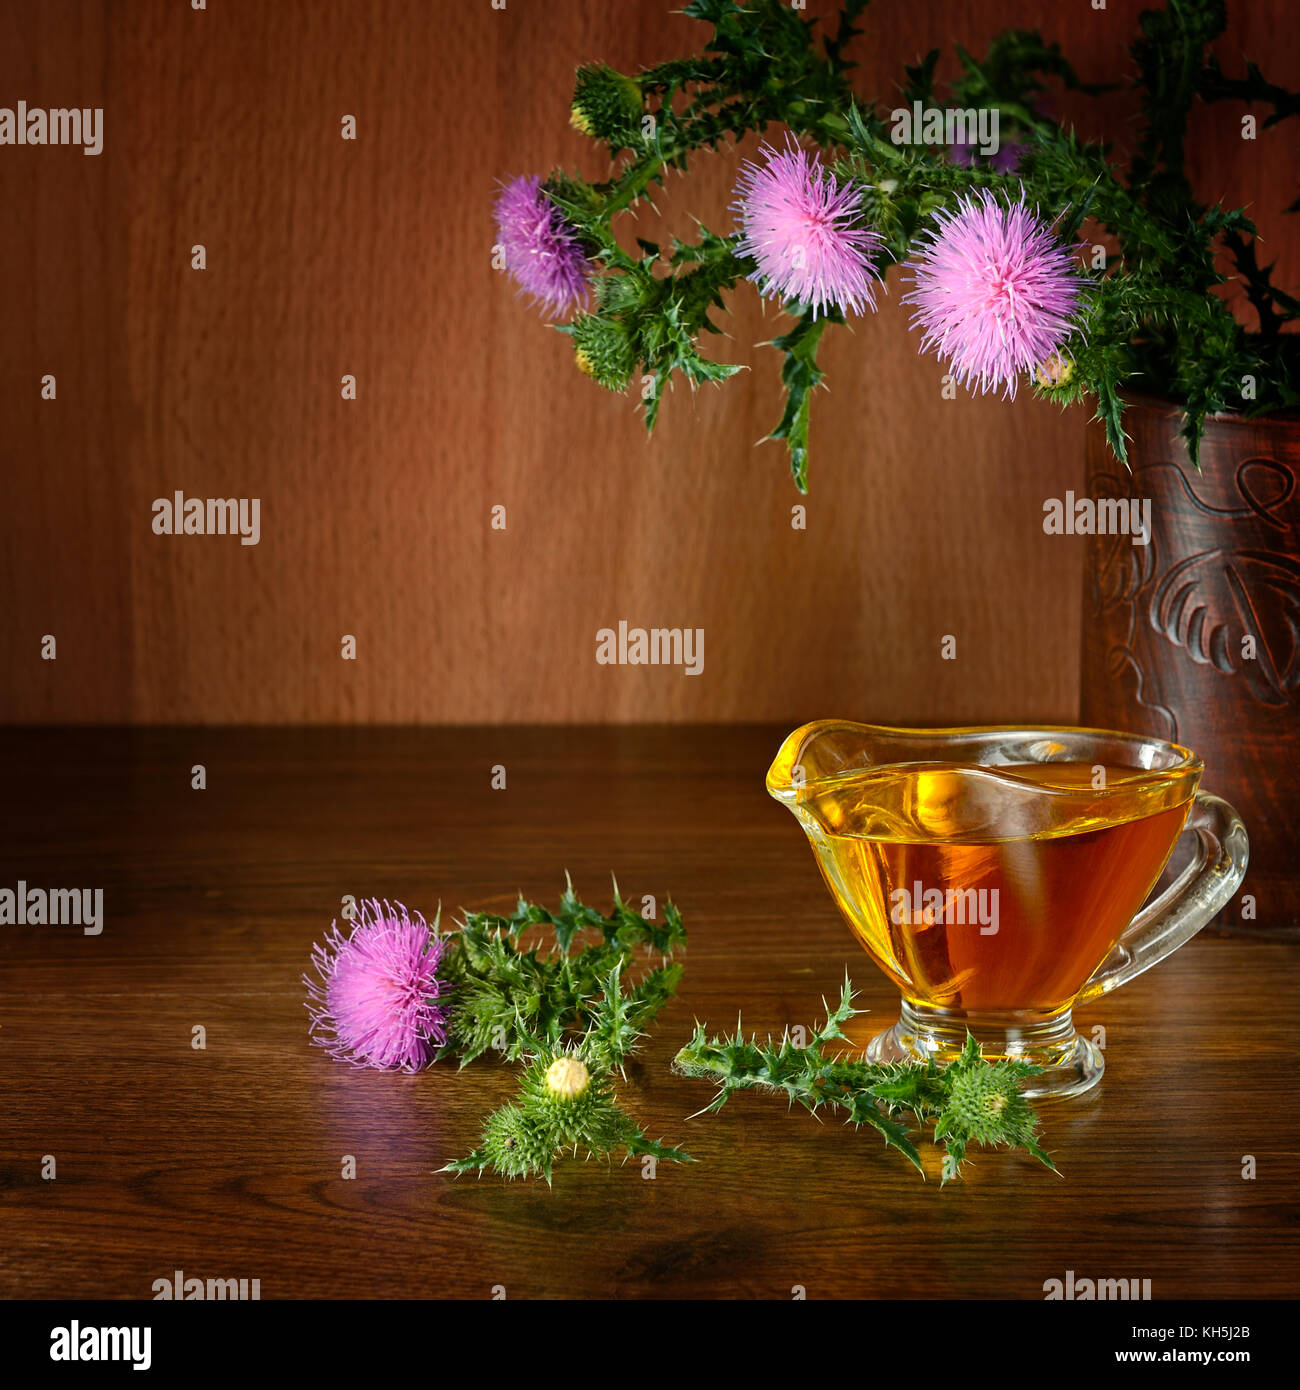 Flowering plant milk thistle and oil glass. Healing herb on wooden background. Free space for text. Stock Photo